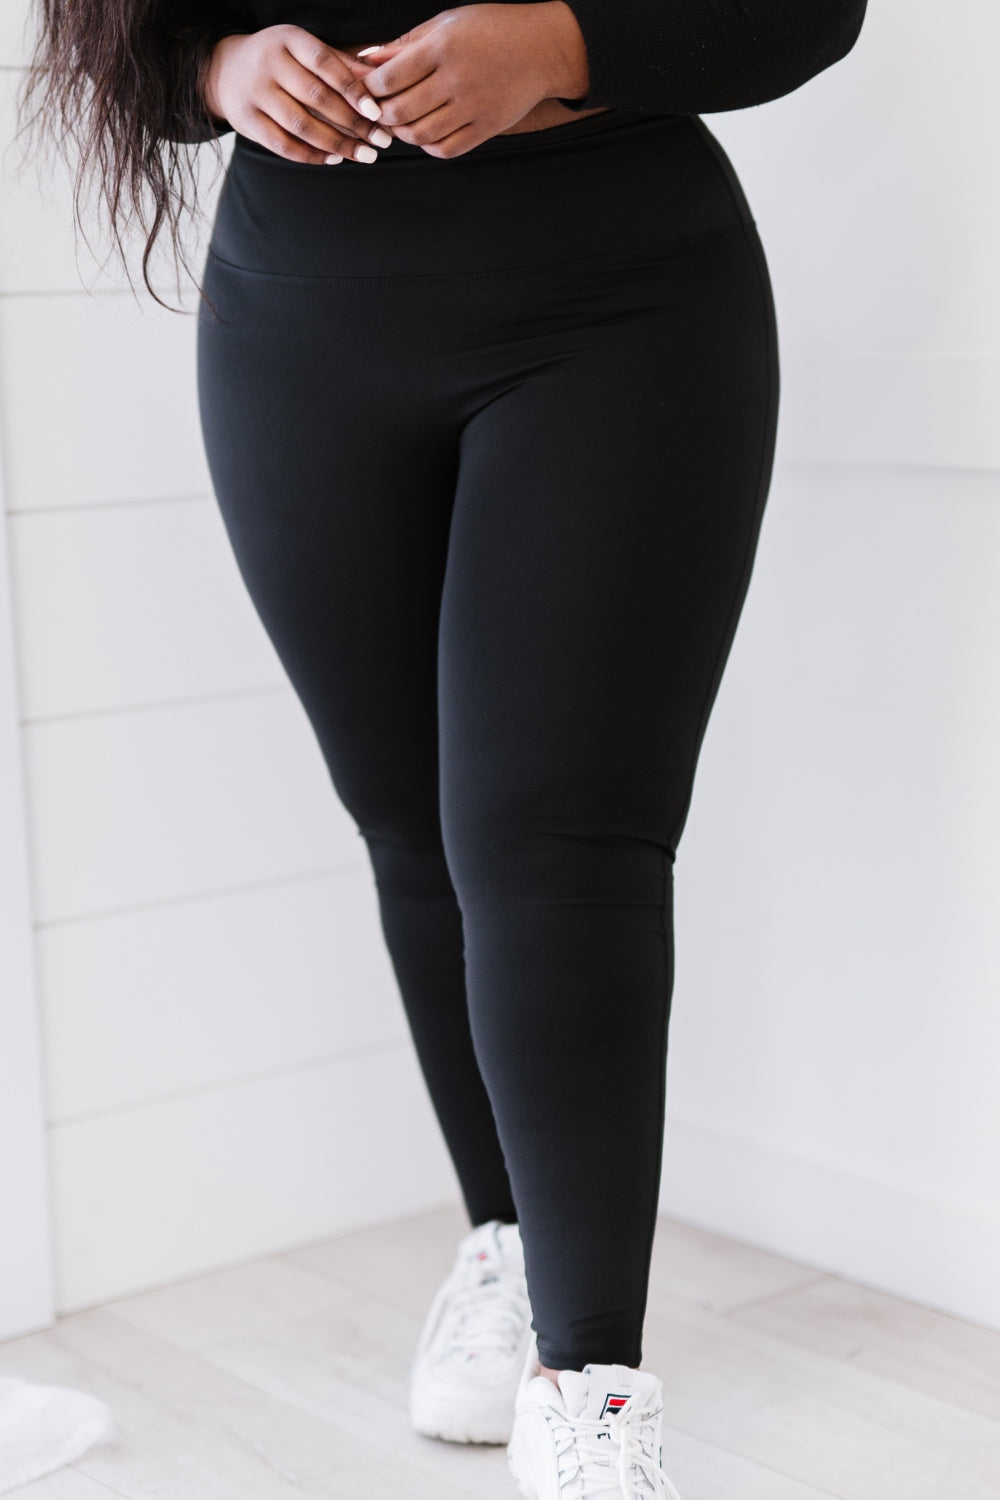 Life’s A Breeze Black Butter Leggings, SIGN UP FOR RESTOCK!